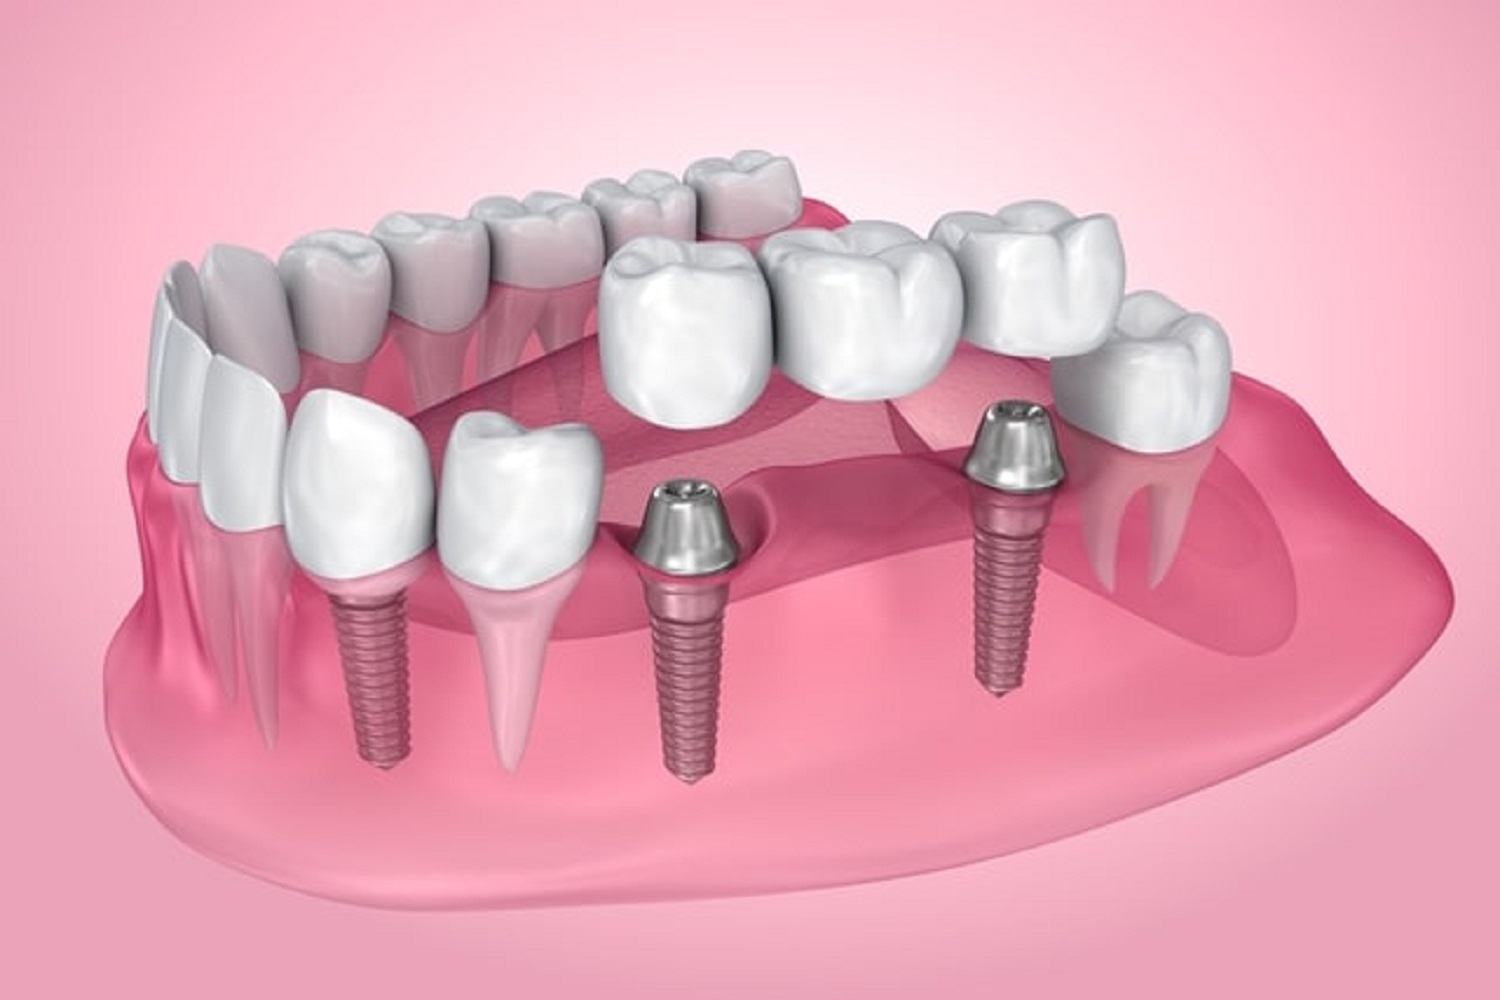 know all about dental implants